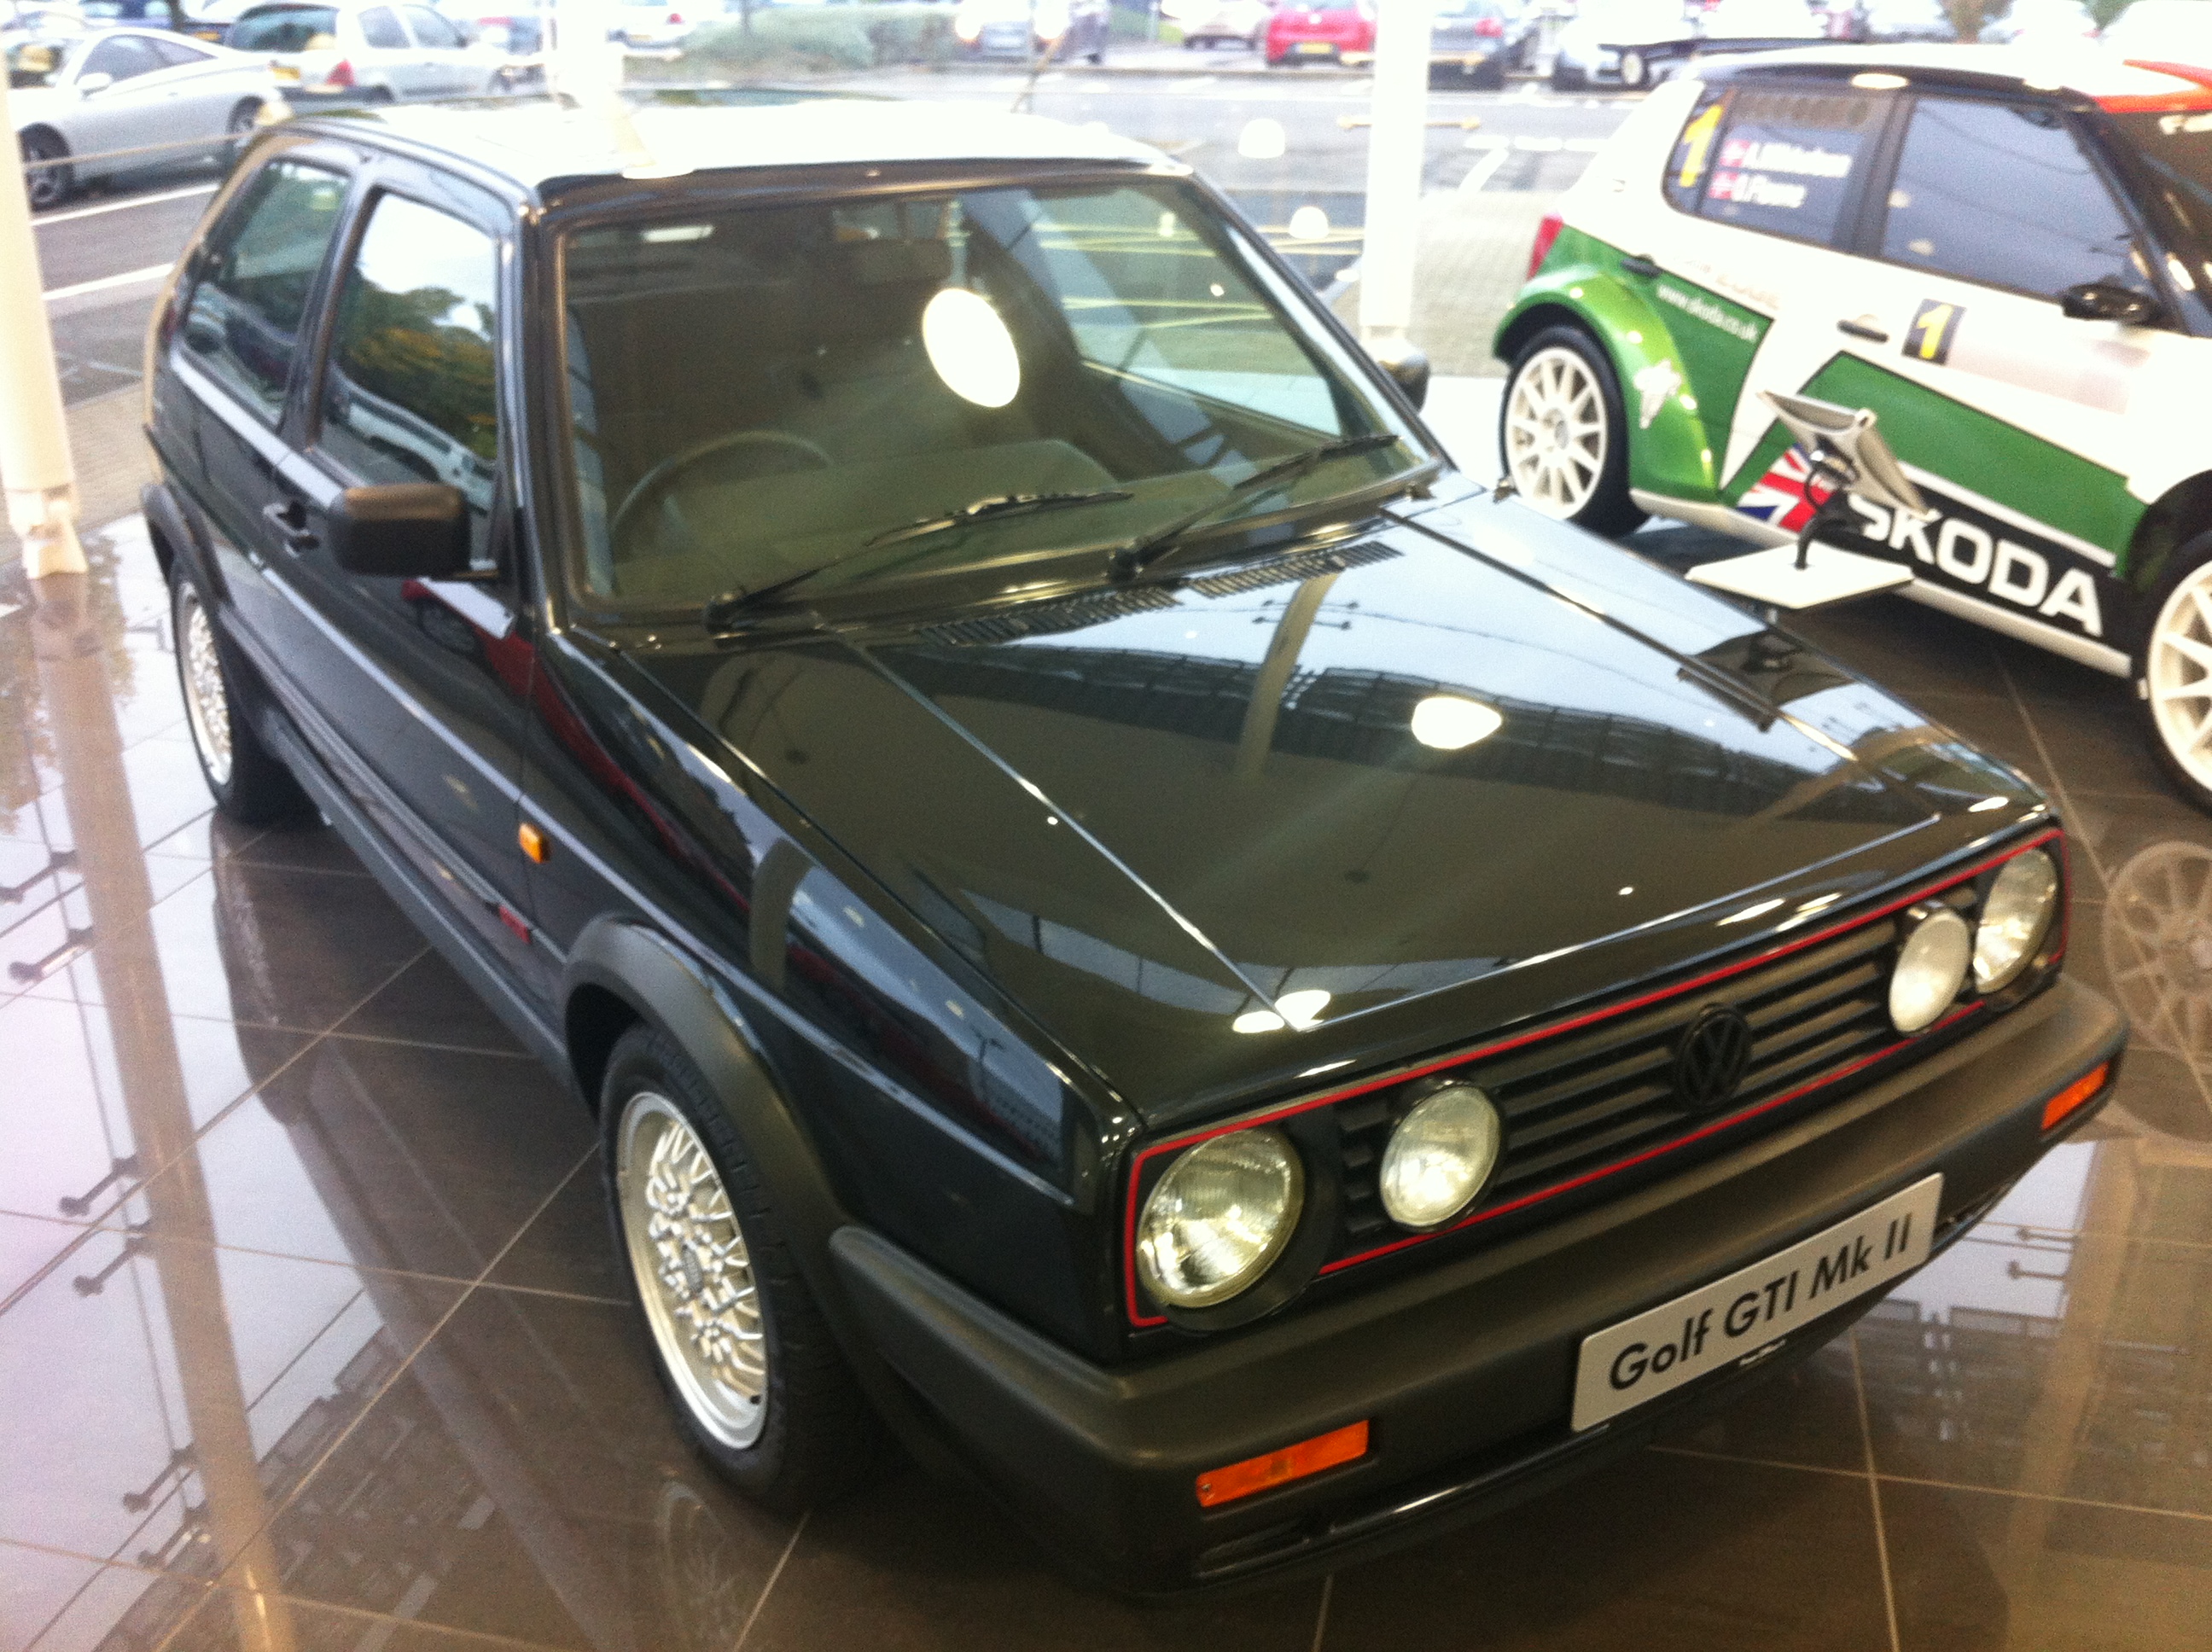 The Best Golf Mk2 In The Country